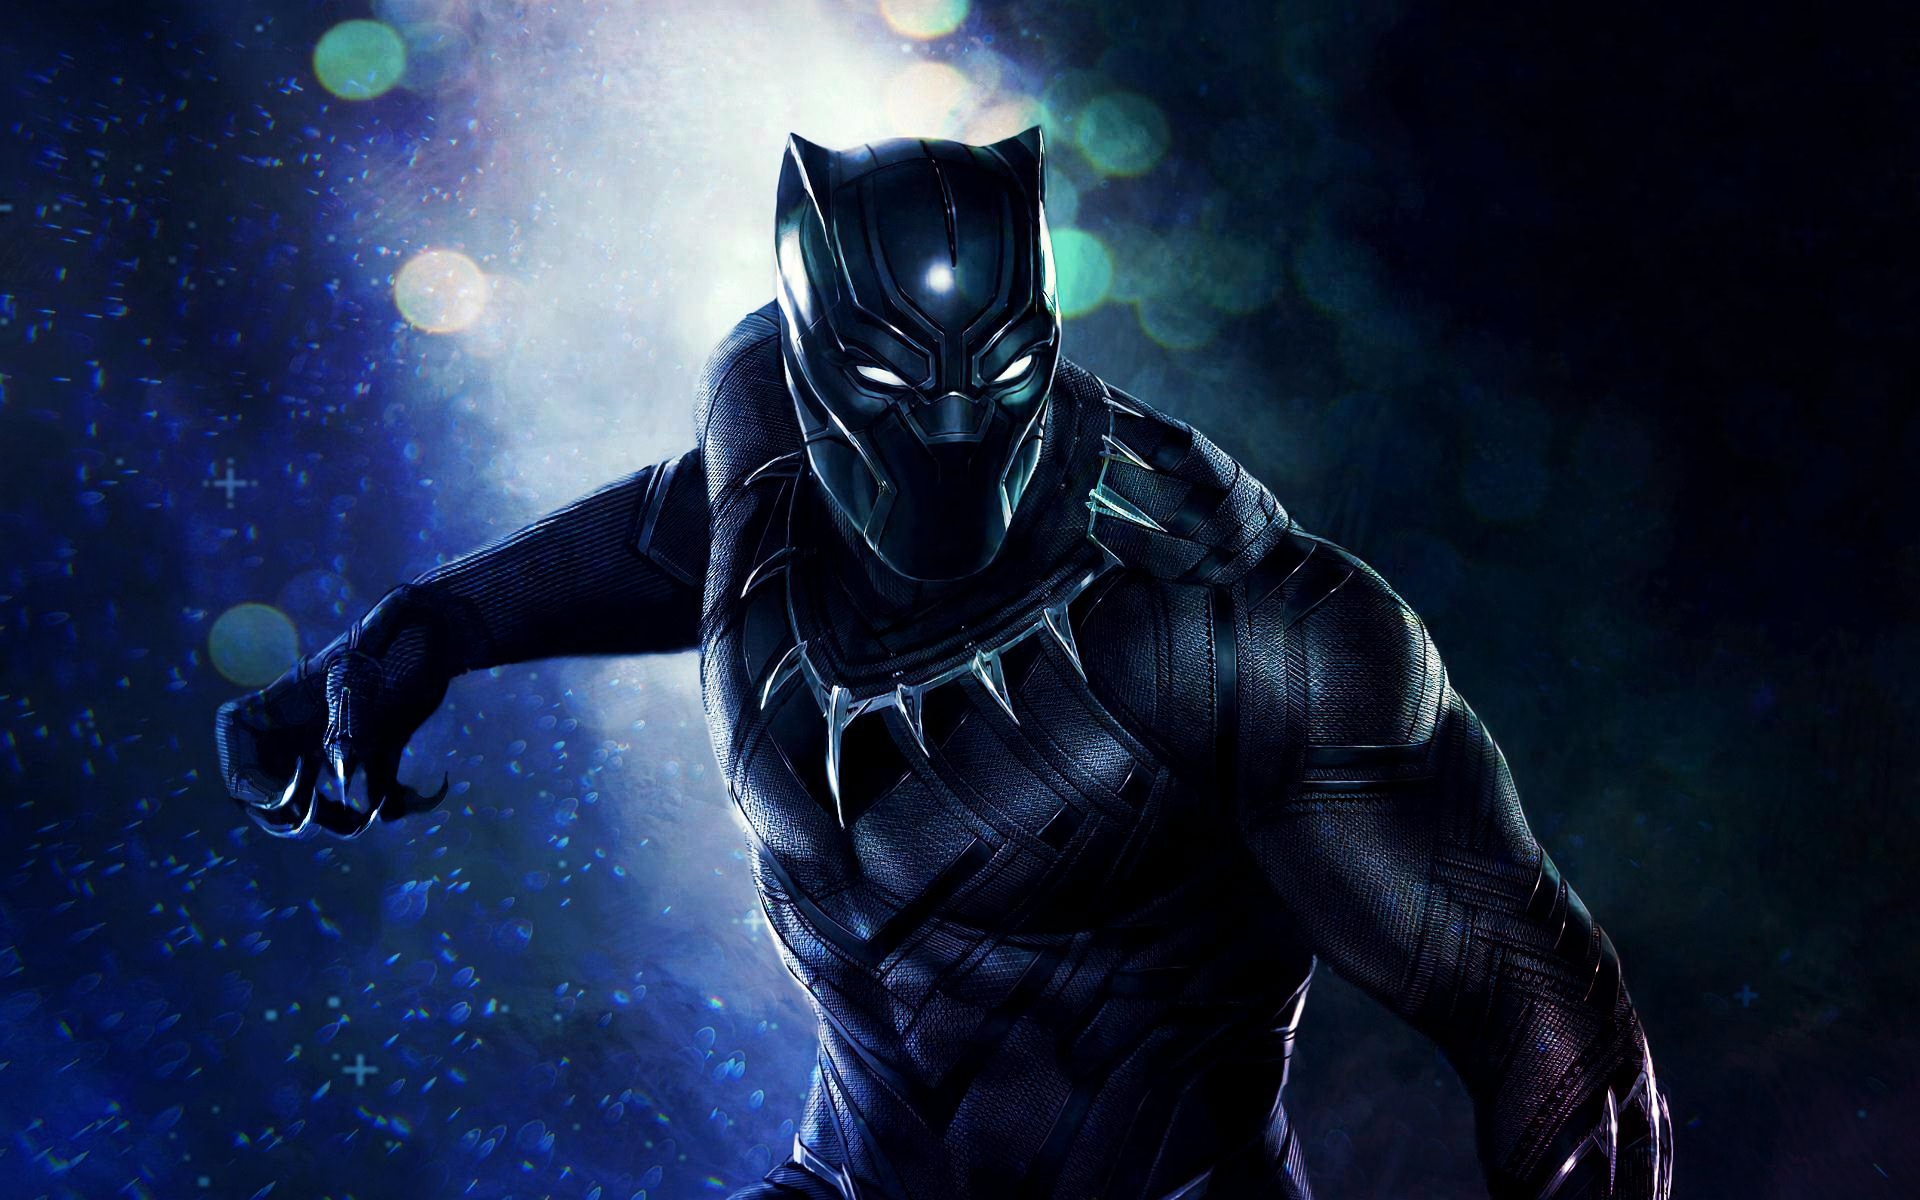 Free Black Panther Android Wallpaper Downloads 100 Black Panther  Android Wallpapers for FREE  Wallpaperscom